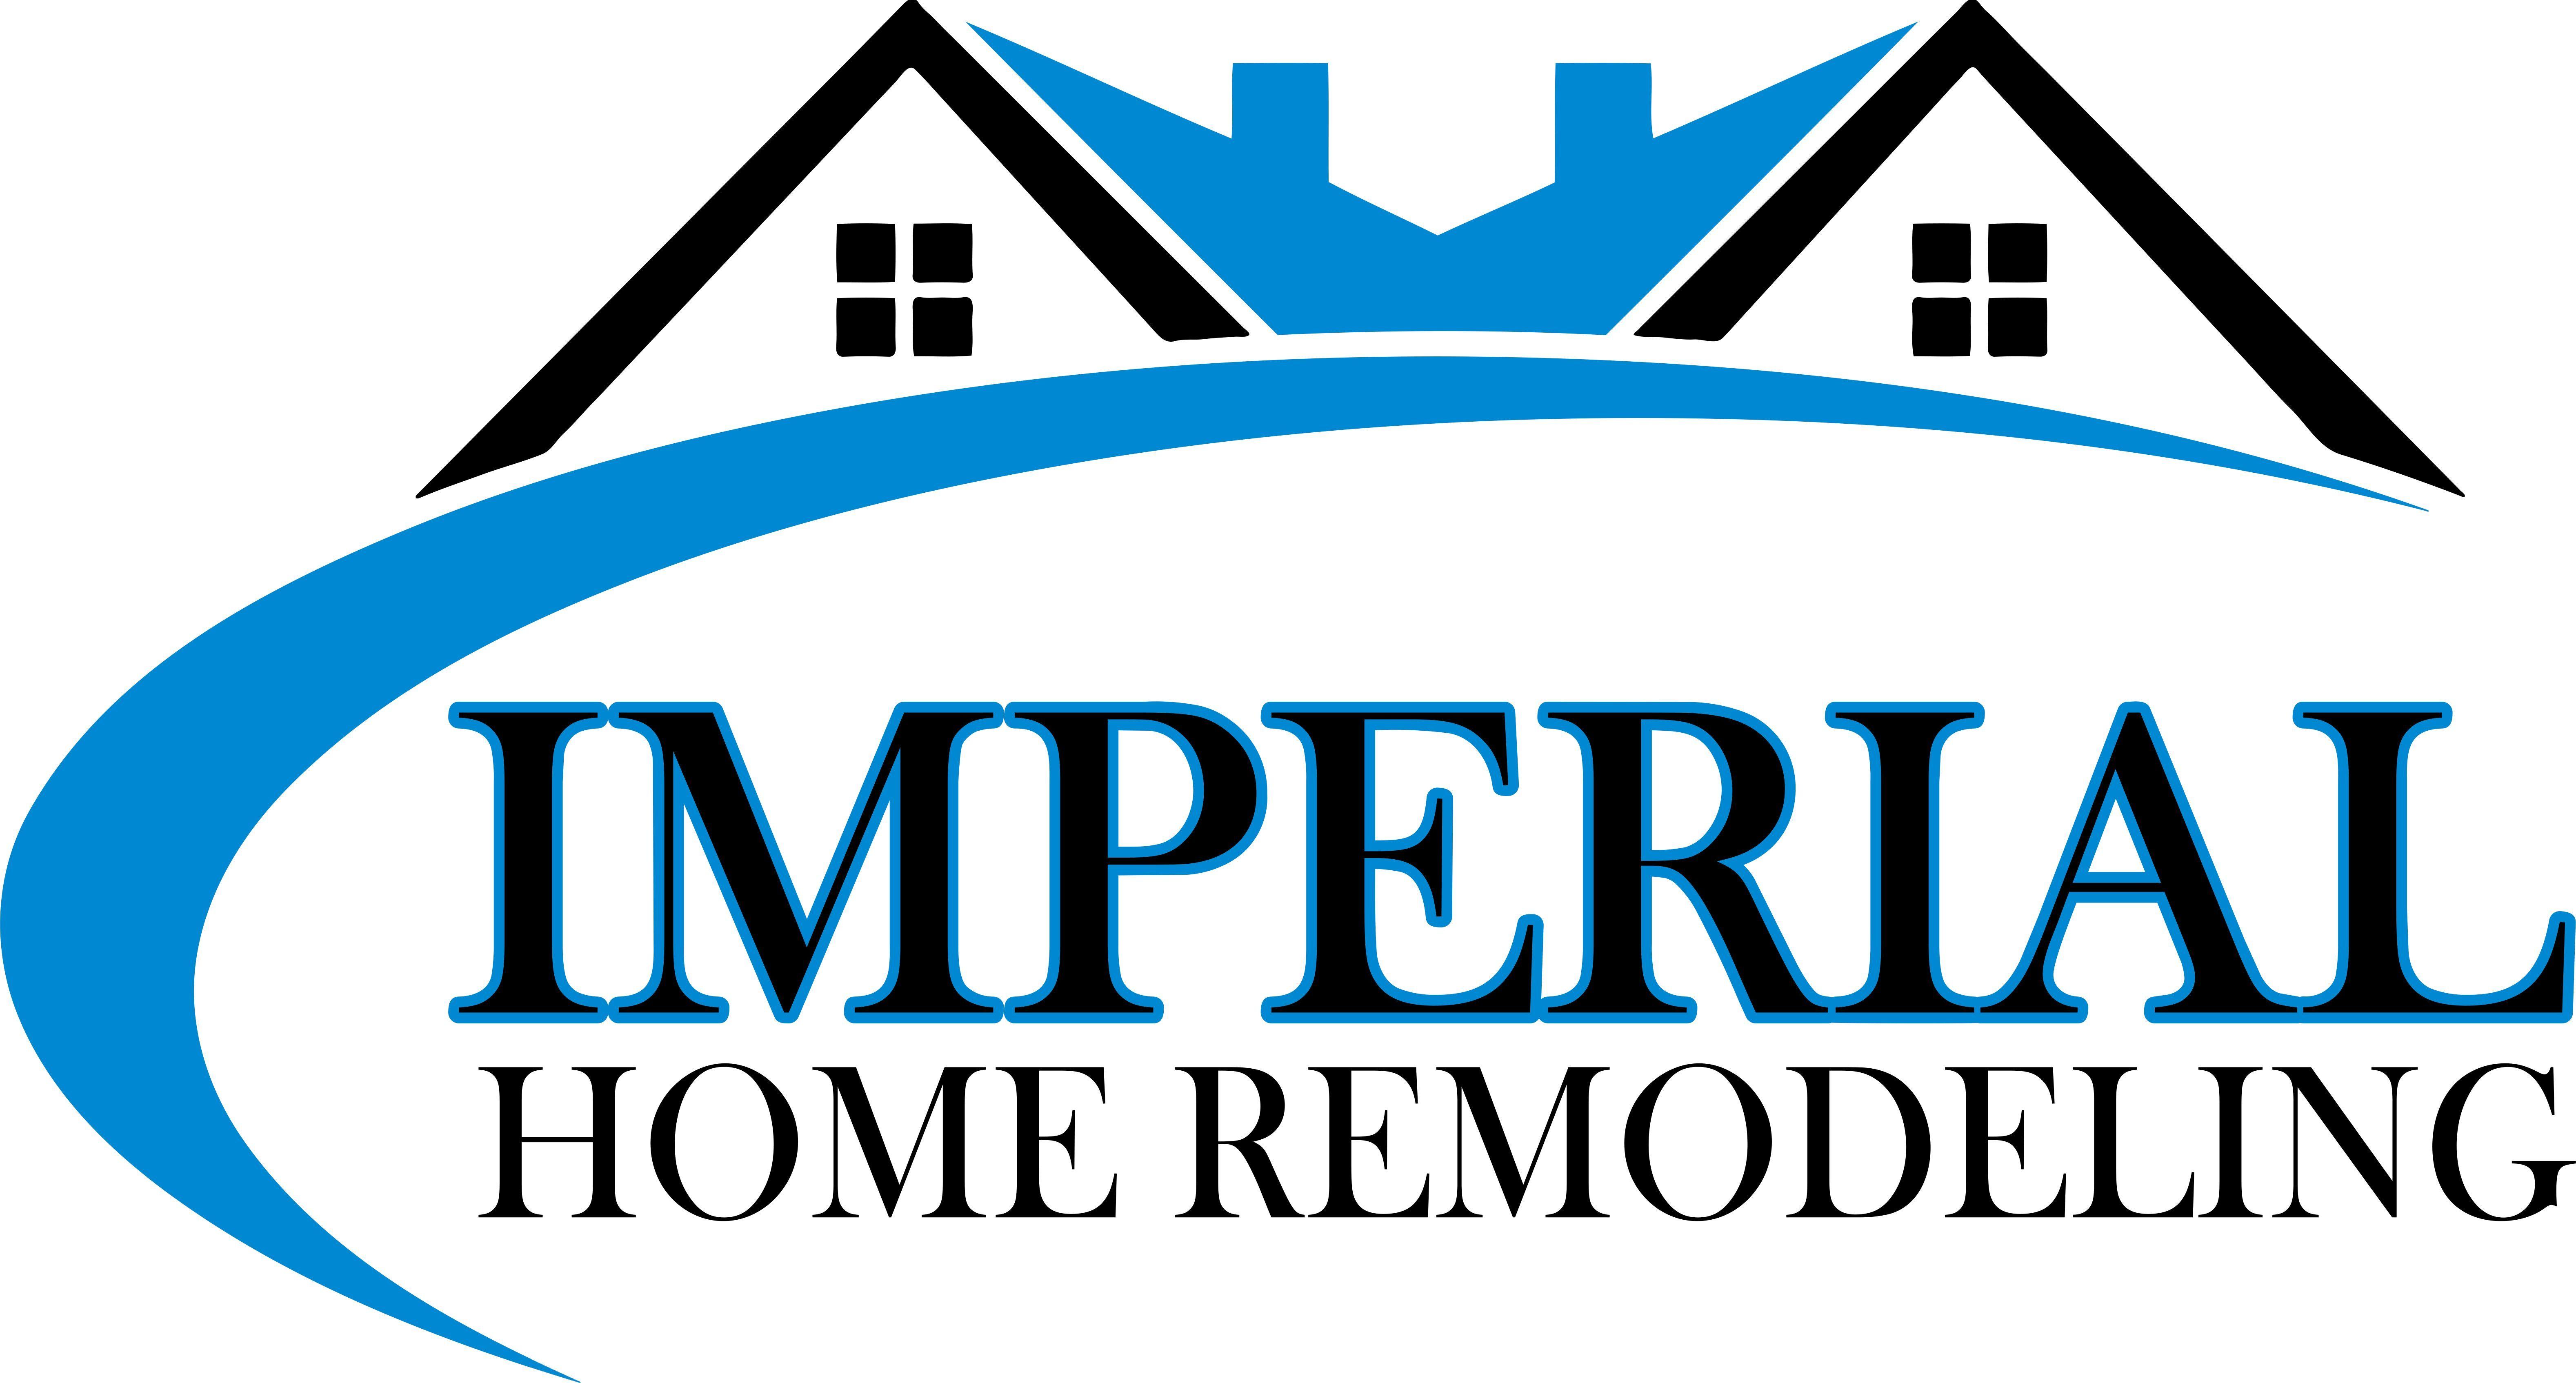 Home Remodeling Logo - LOGO - Imperial Home Remodeling LLC - South Jersey Storm All Star ...